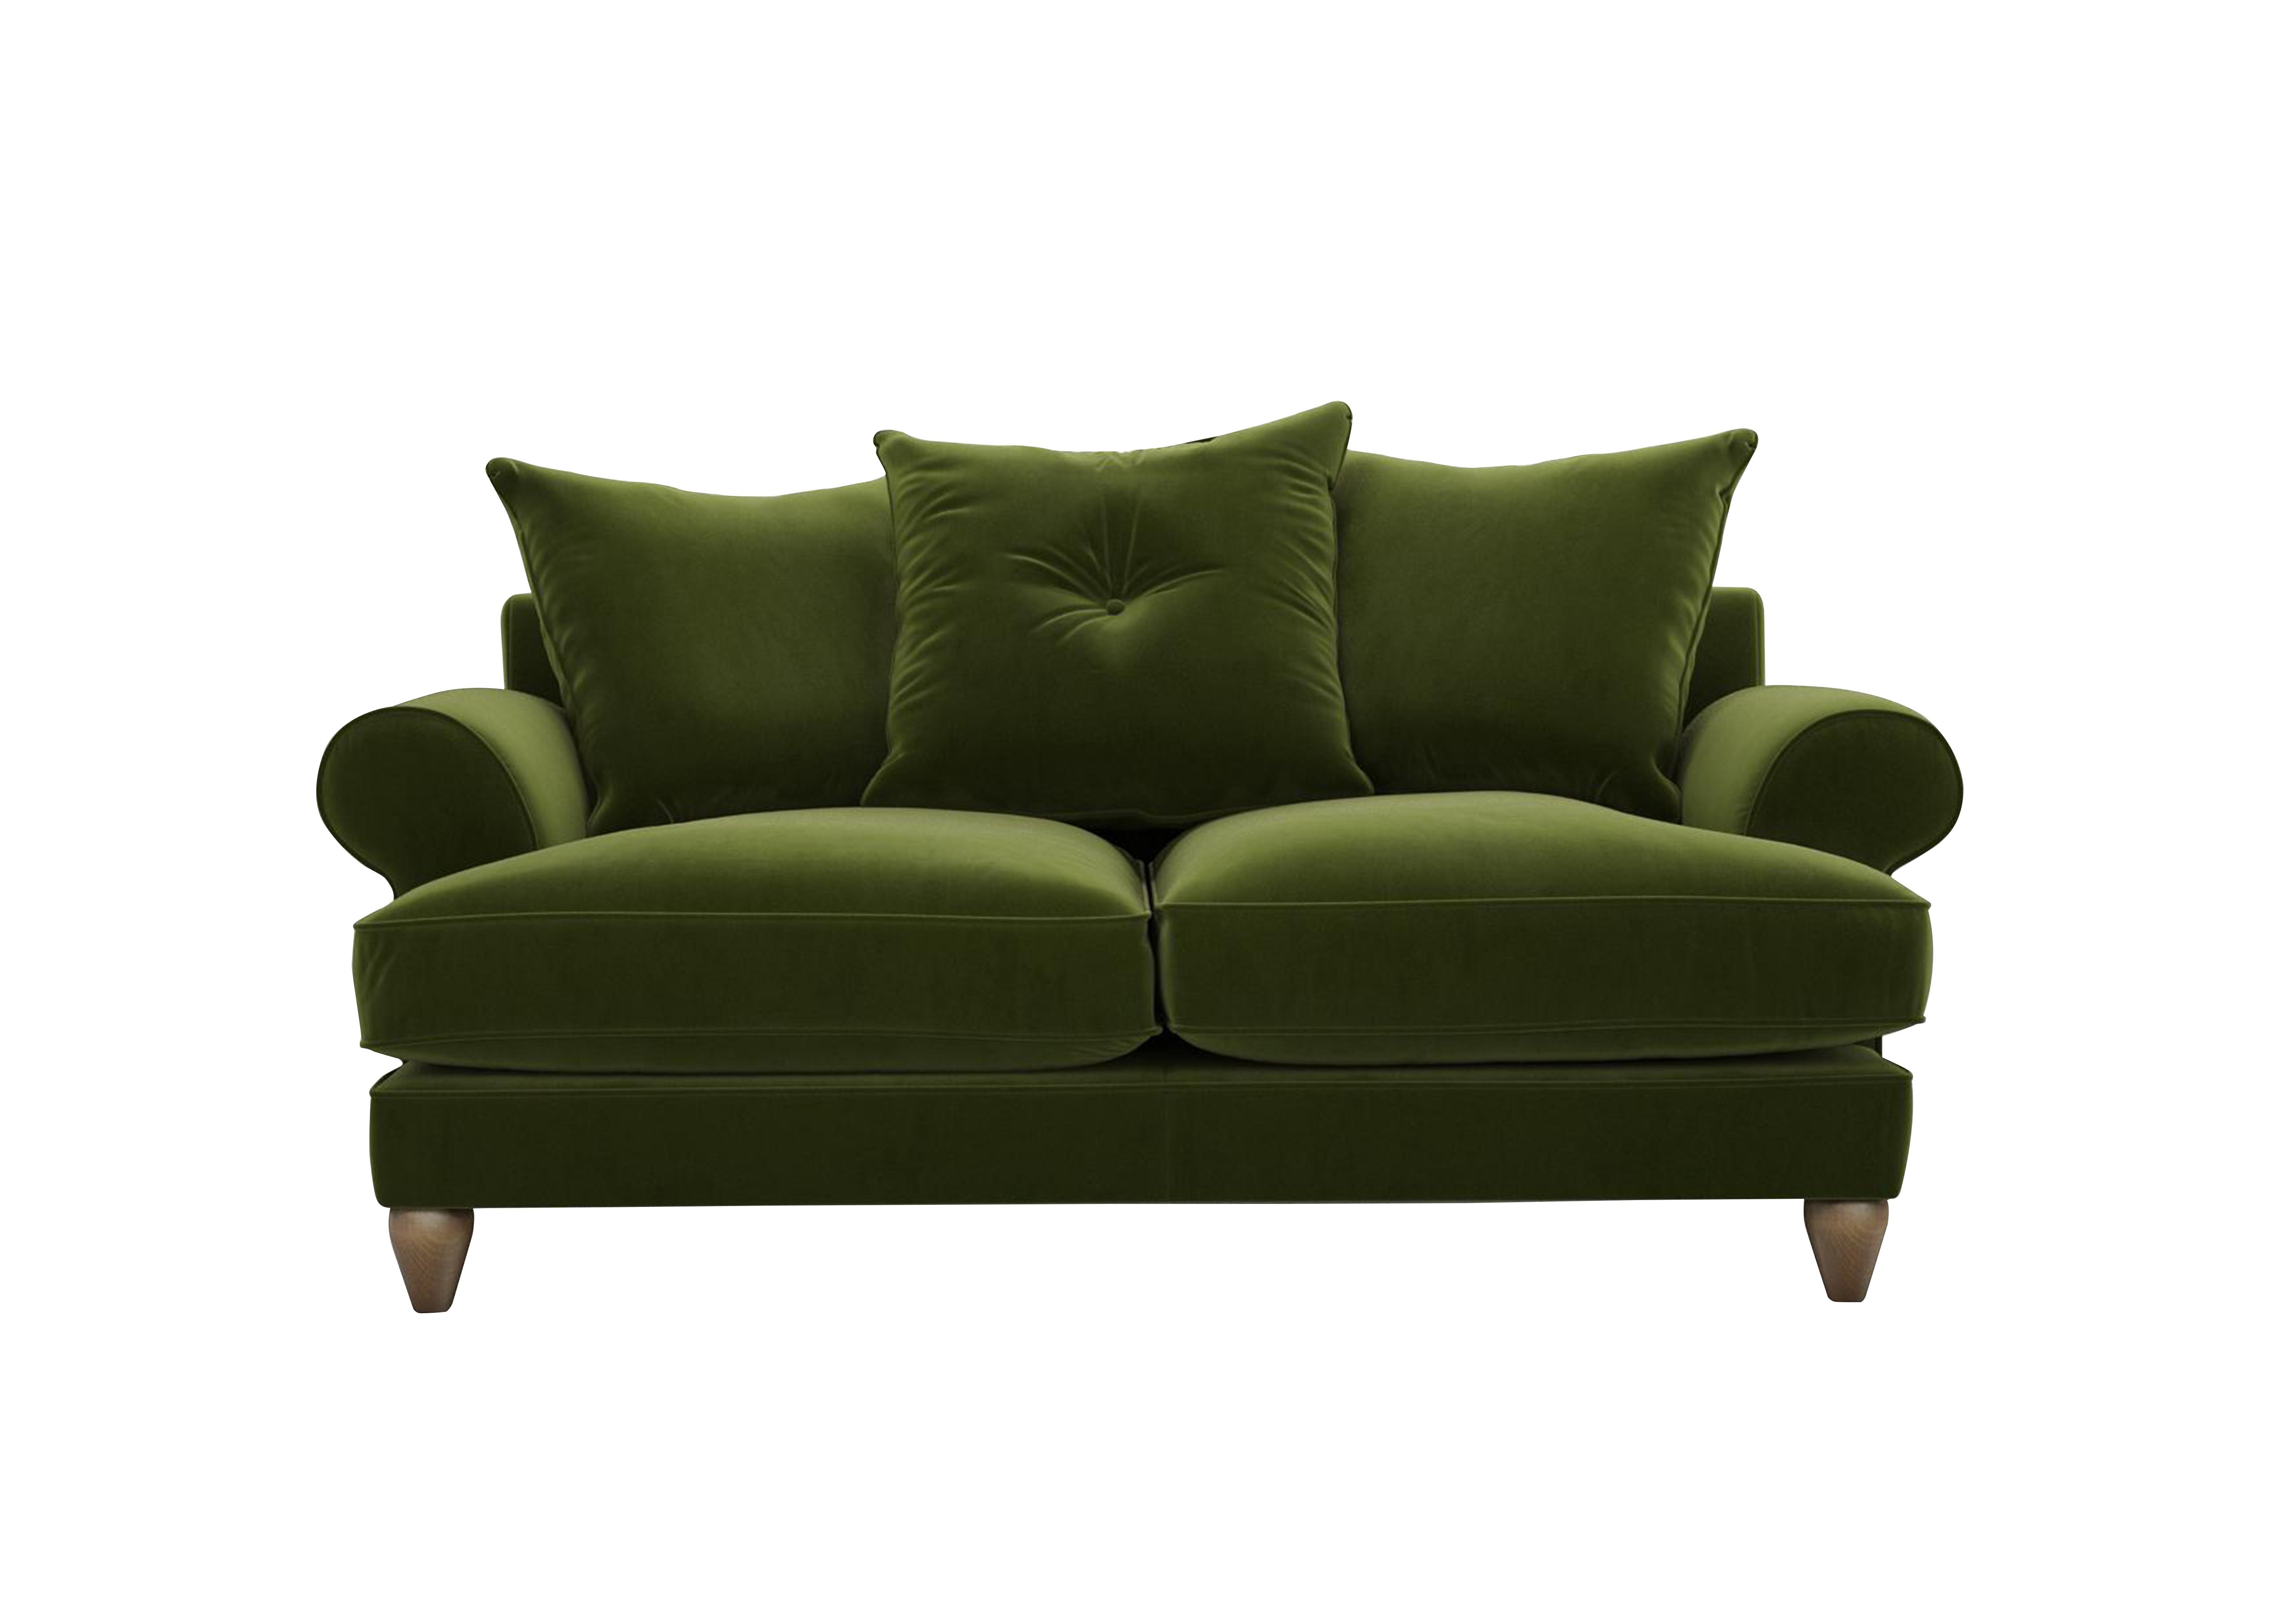 Bronwyn 2.5 Seater Fabric Scatter Back Sofa in Woo160 Woodland Moss on Furniture Village